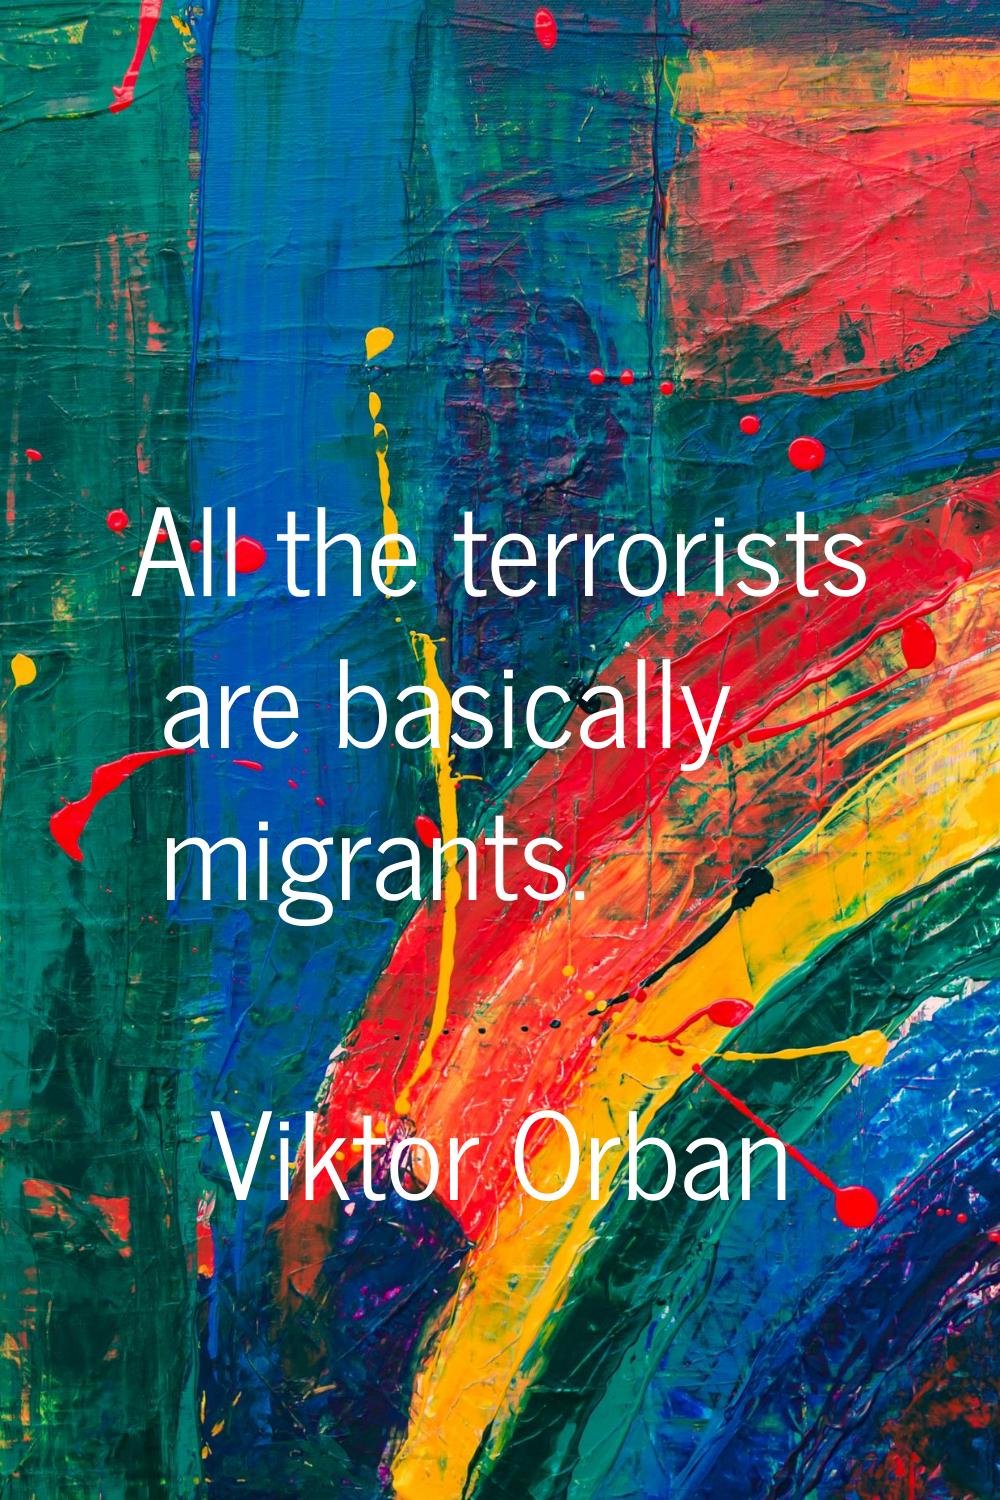 All the terrorists are basically migrants.